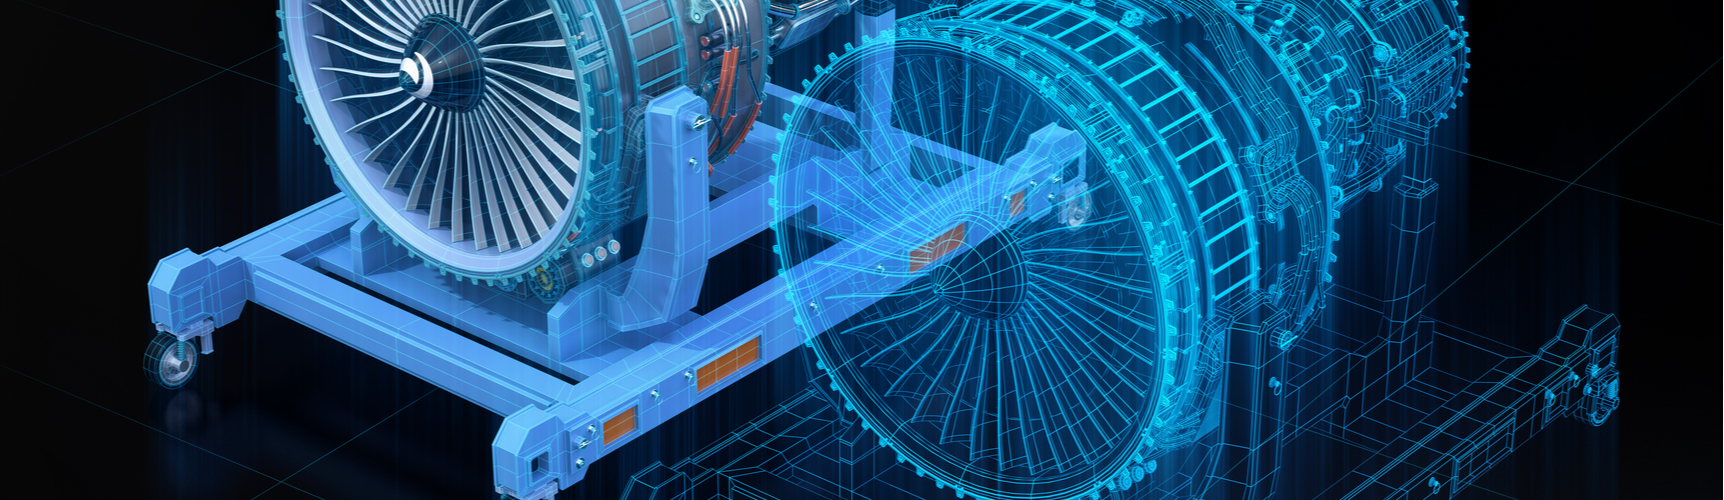 Digital Twin Manufacturing Solution | Quest Global